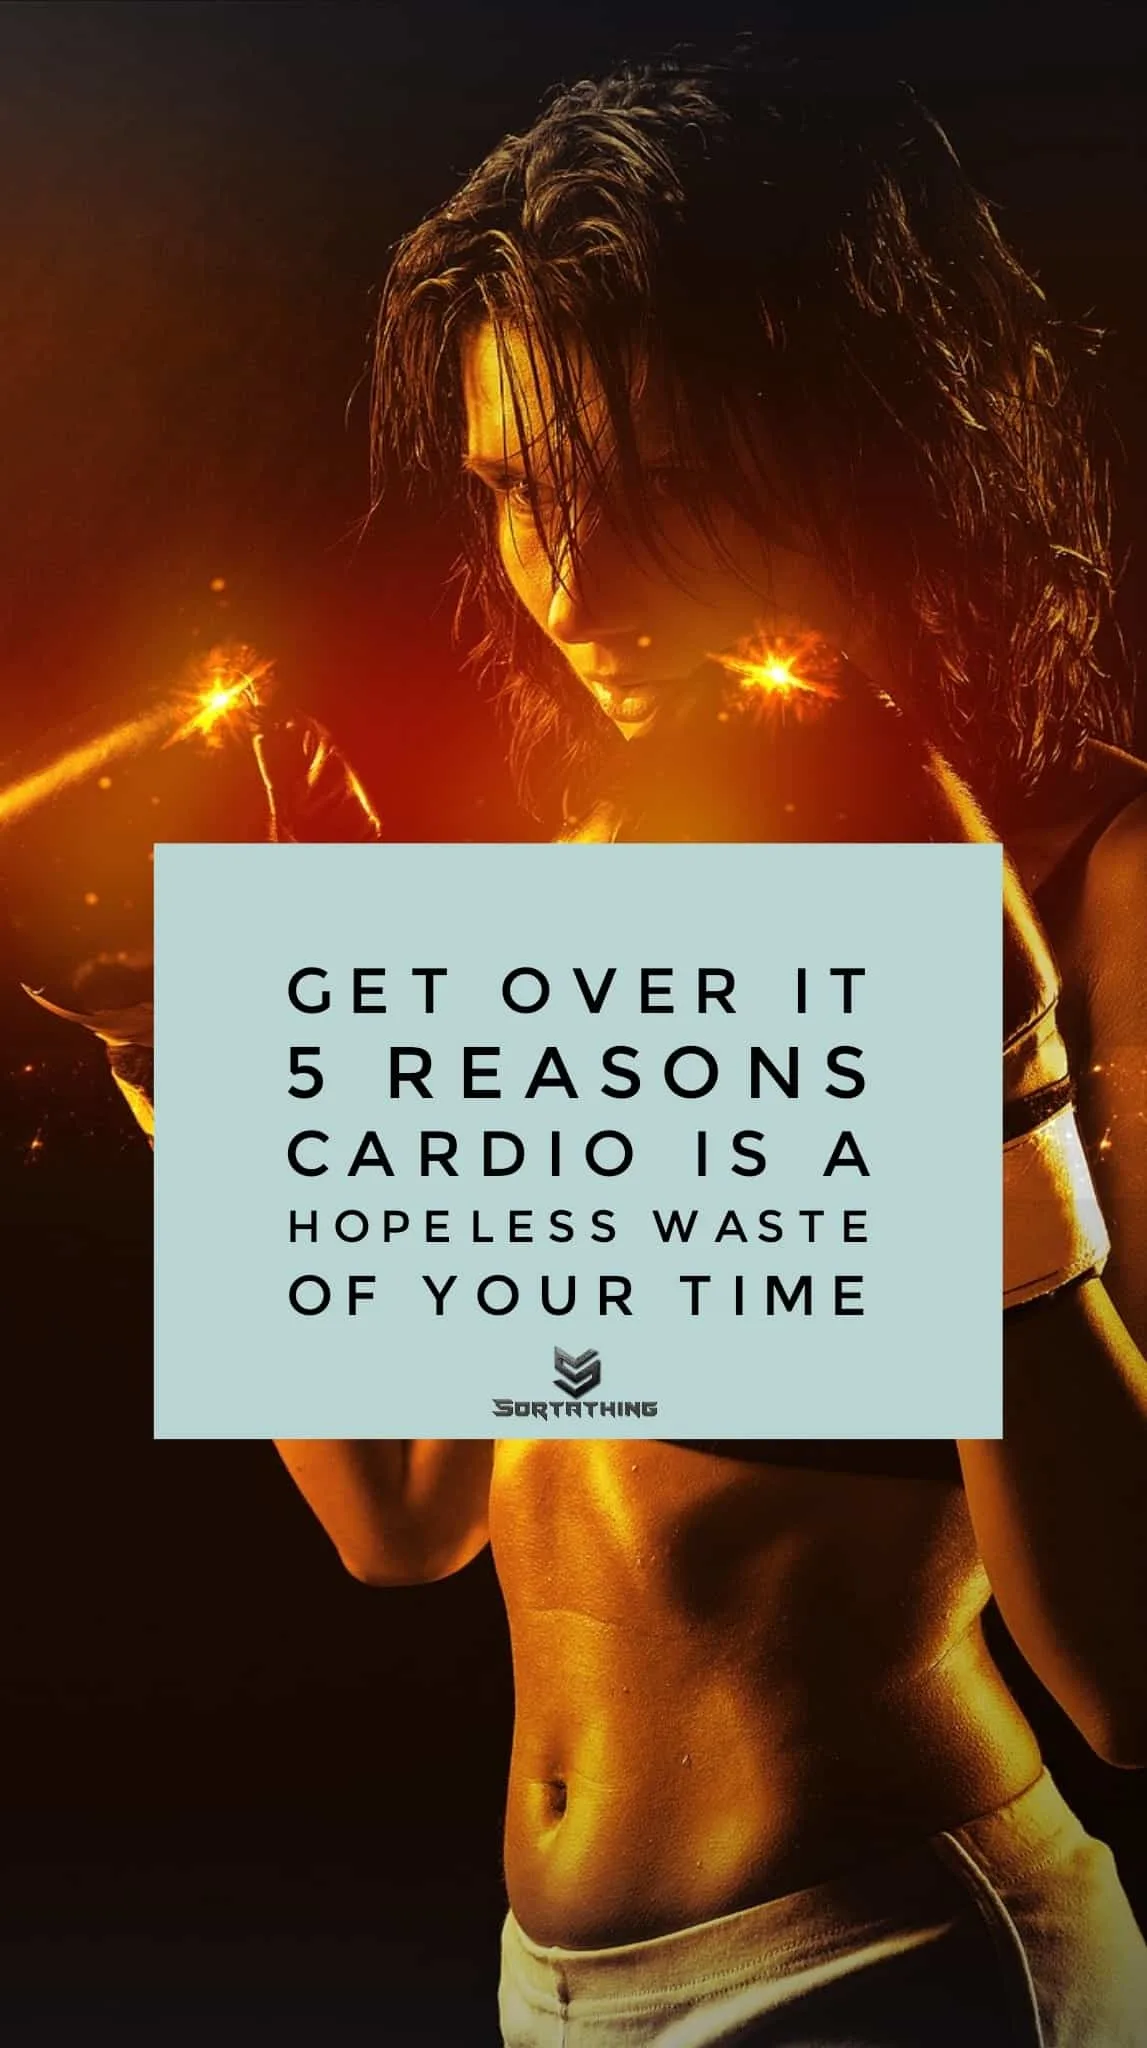 Intensity - Cardio Waste of Time